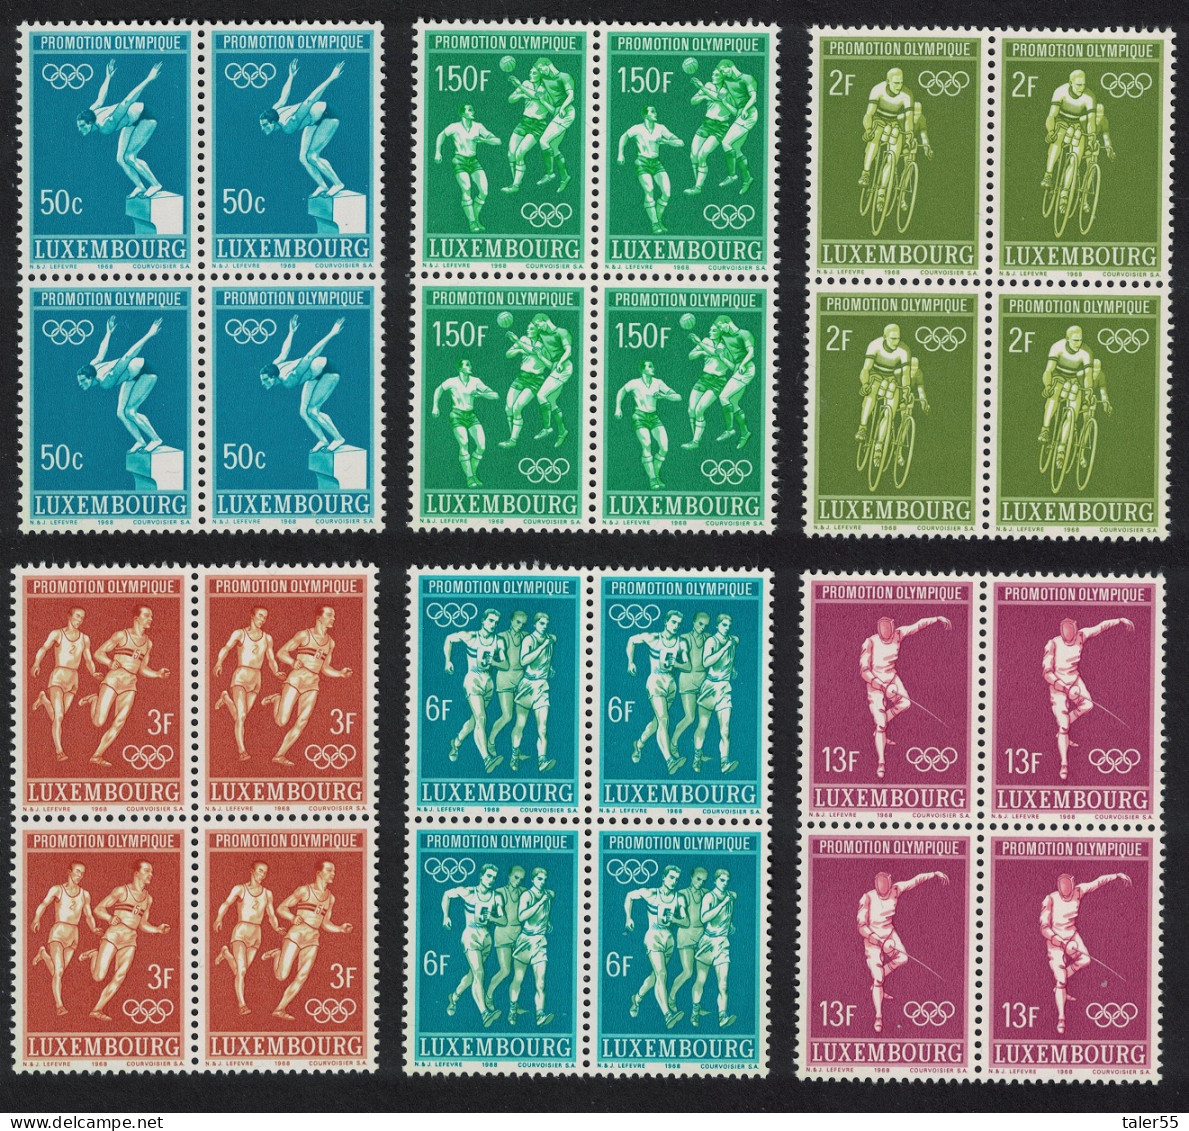 Luxembourg Football Cycling Olympic Games 6v Blocks Of 4 1968 MNH SG#815-820 MI#765-770 - Nuovi